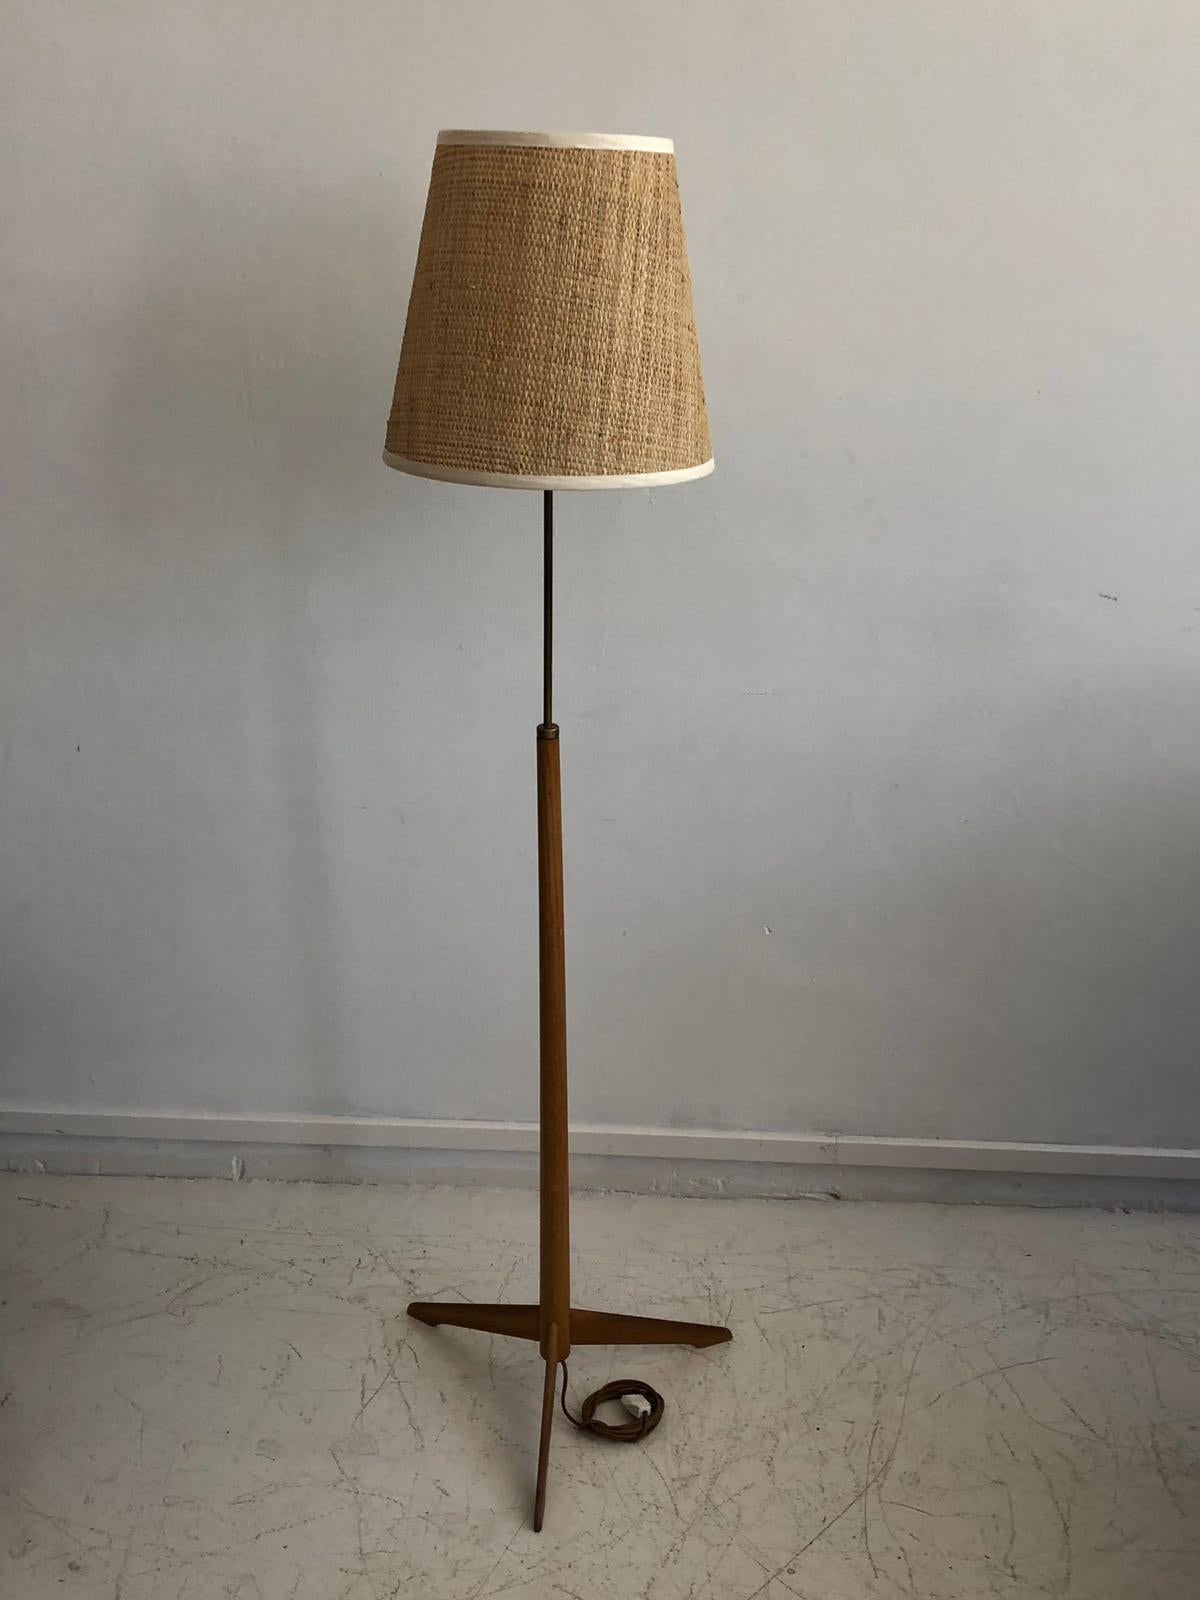 Swedish mid-20th century floor lamp, model G-34, produced by Bergboms. Wooden stand with metal parts and a rattan screen.